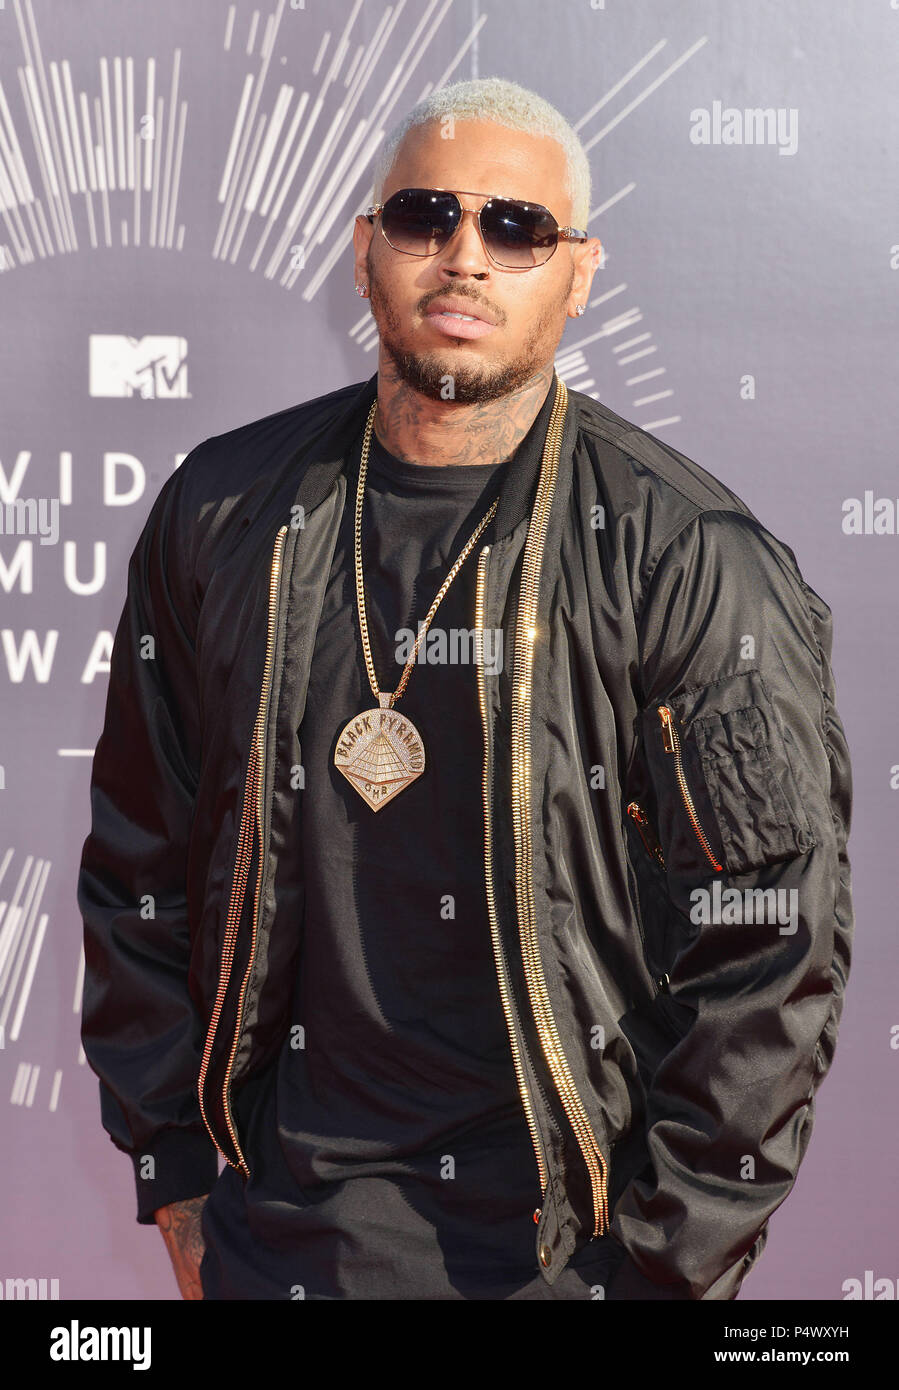 Chris Brown 148 at the  MTV Video Music Awards at the Great Western Forum in Los Angeles.Chris Brown 148 ------------- Red Carpet Event, Vertical, USA, Film Industry, Celebrities,  Photography, Bestof, Arts Culture and Entertainment, Topix Celebrities fashion /  Vertical, Best of, Event in Hollywood Life - California,  Red Carpet and backstage, USA, Film Industry, Celebrities,  movie celebrities, TV celebrities, Music celebrities, Photography, Bestof, Arts Culture and Entertainment,  Topix, Three Quarters, vertical, one person,, from the year , 2014, inquiry tsuni@Gamma-USA.com Stock Photo